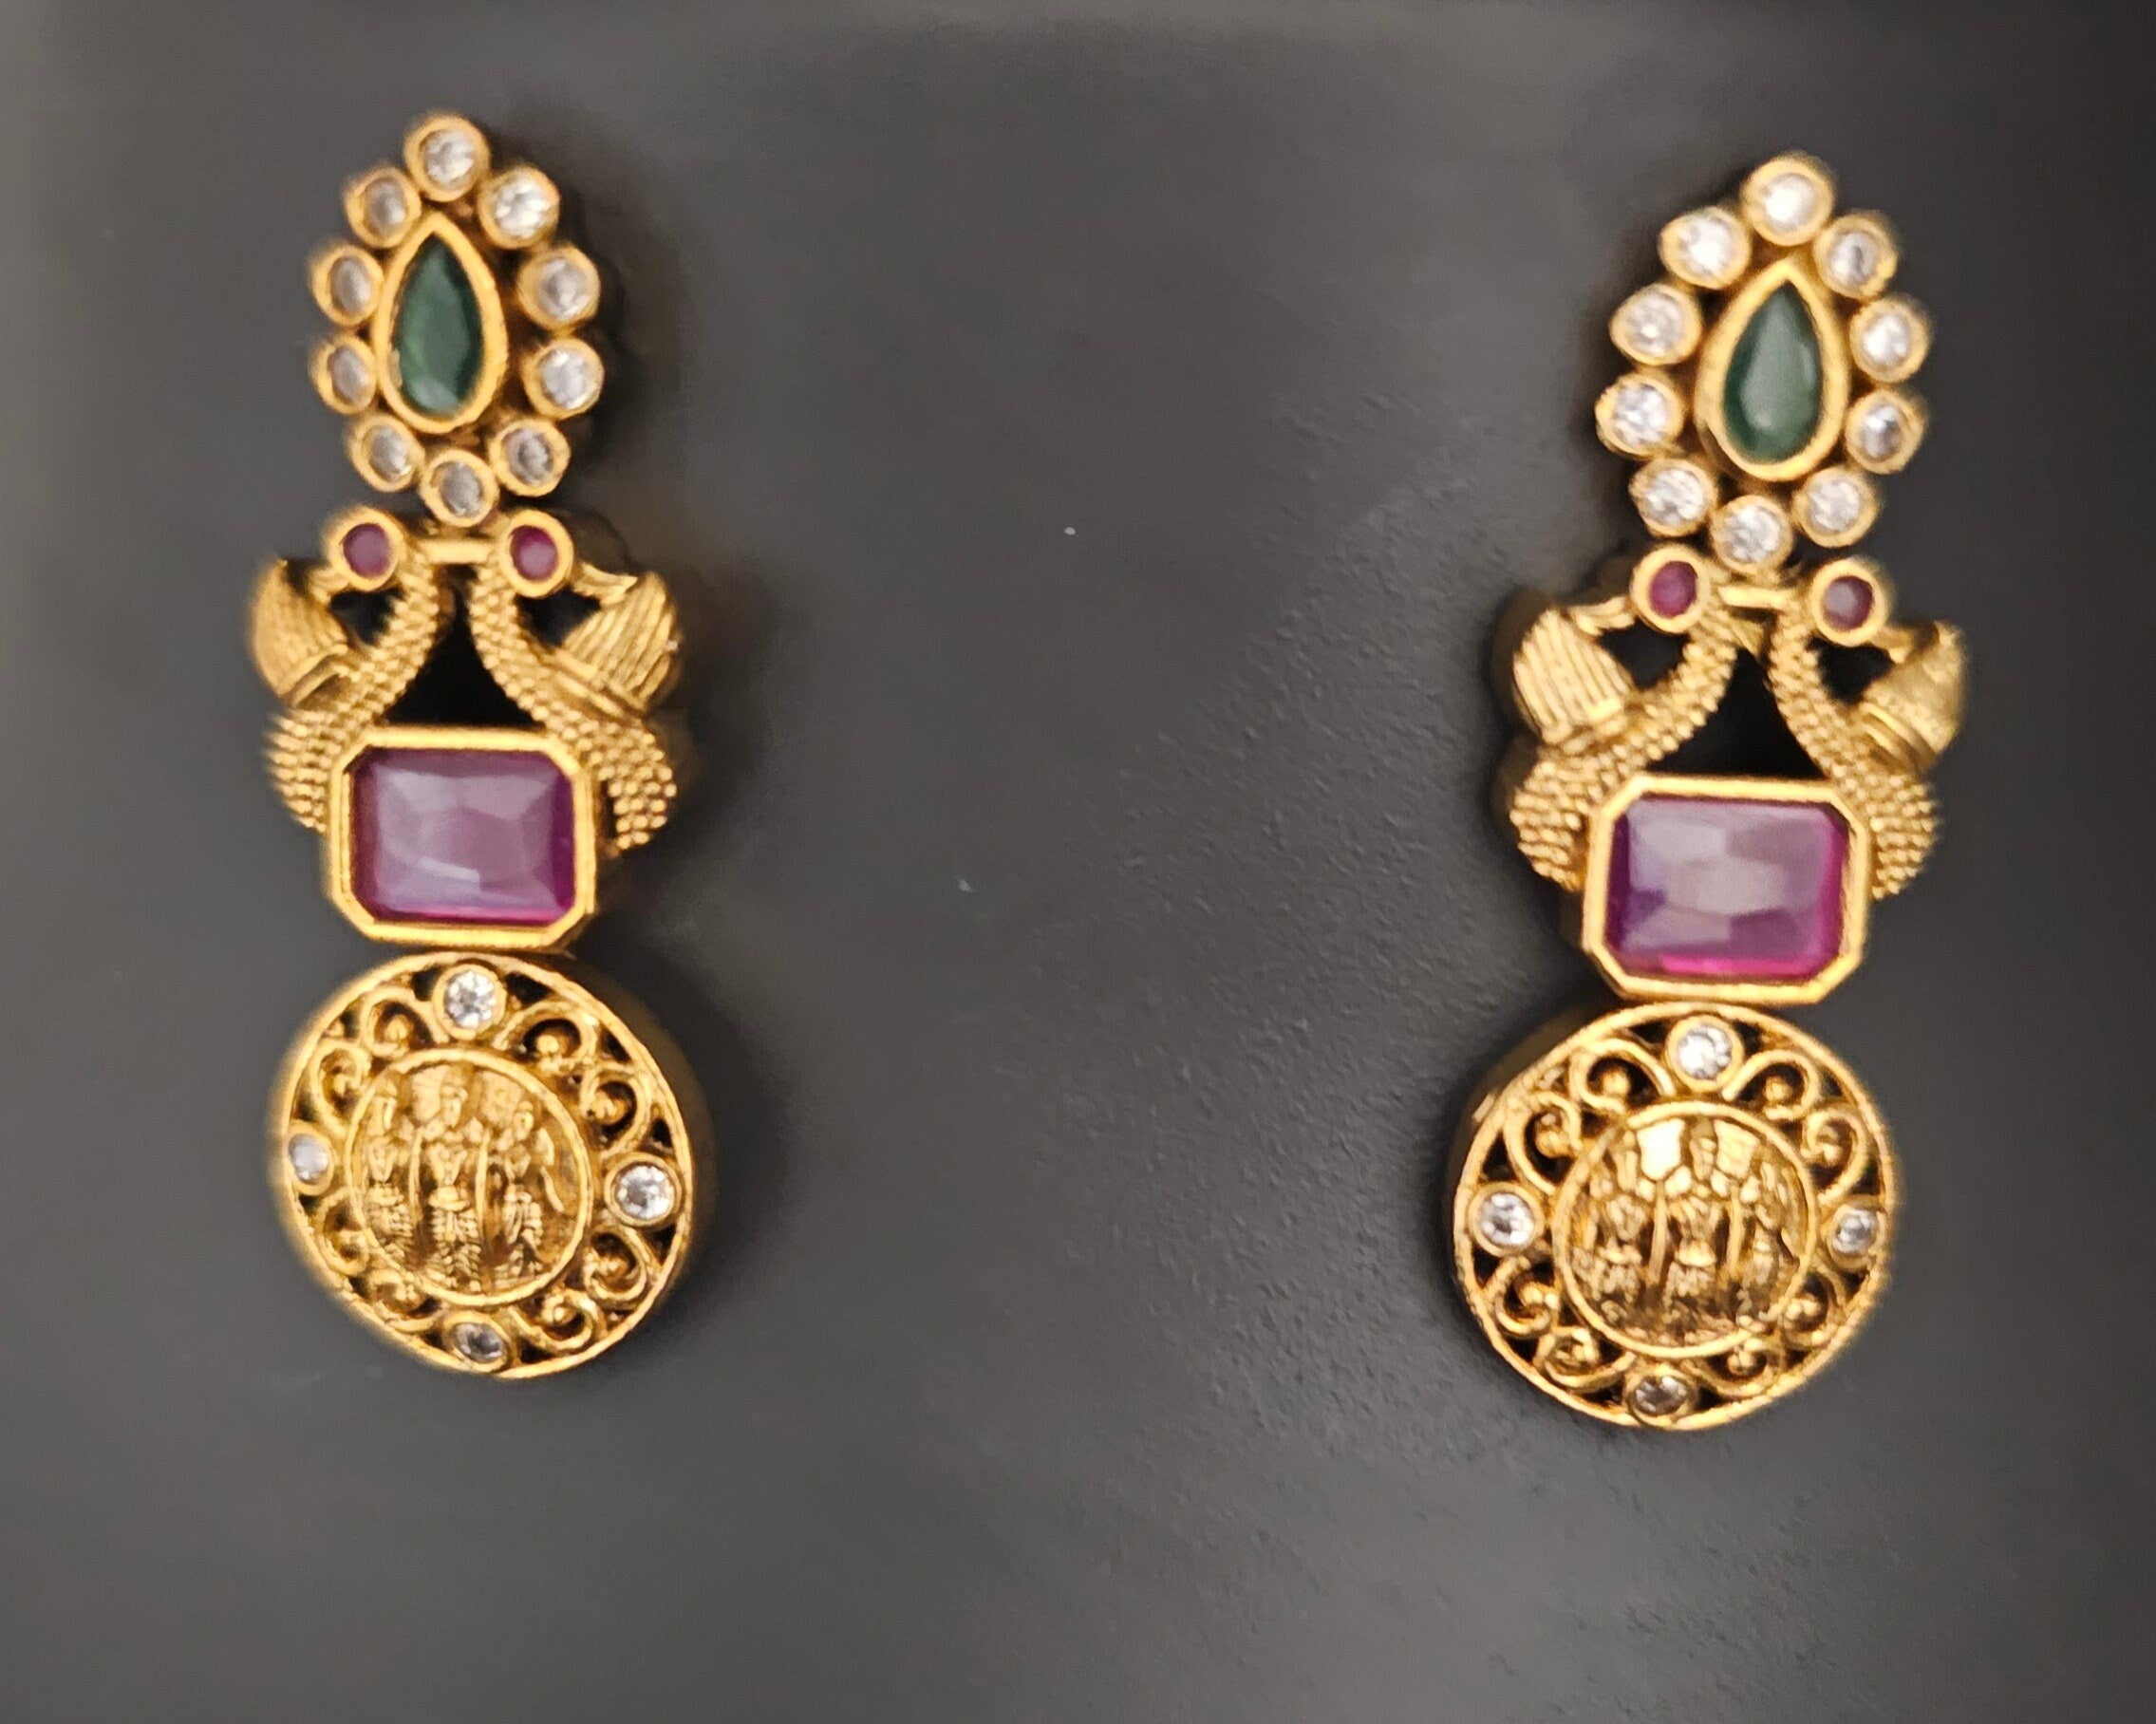 Premium Quality Ramparivar Peacock AD stone Haram with matching Earrings - Gold Jewelry Replica